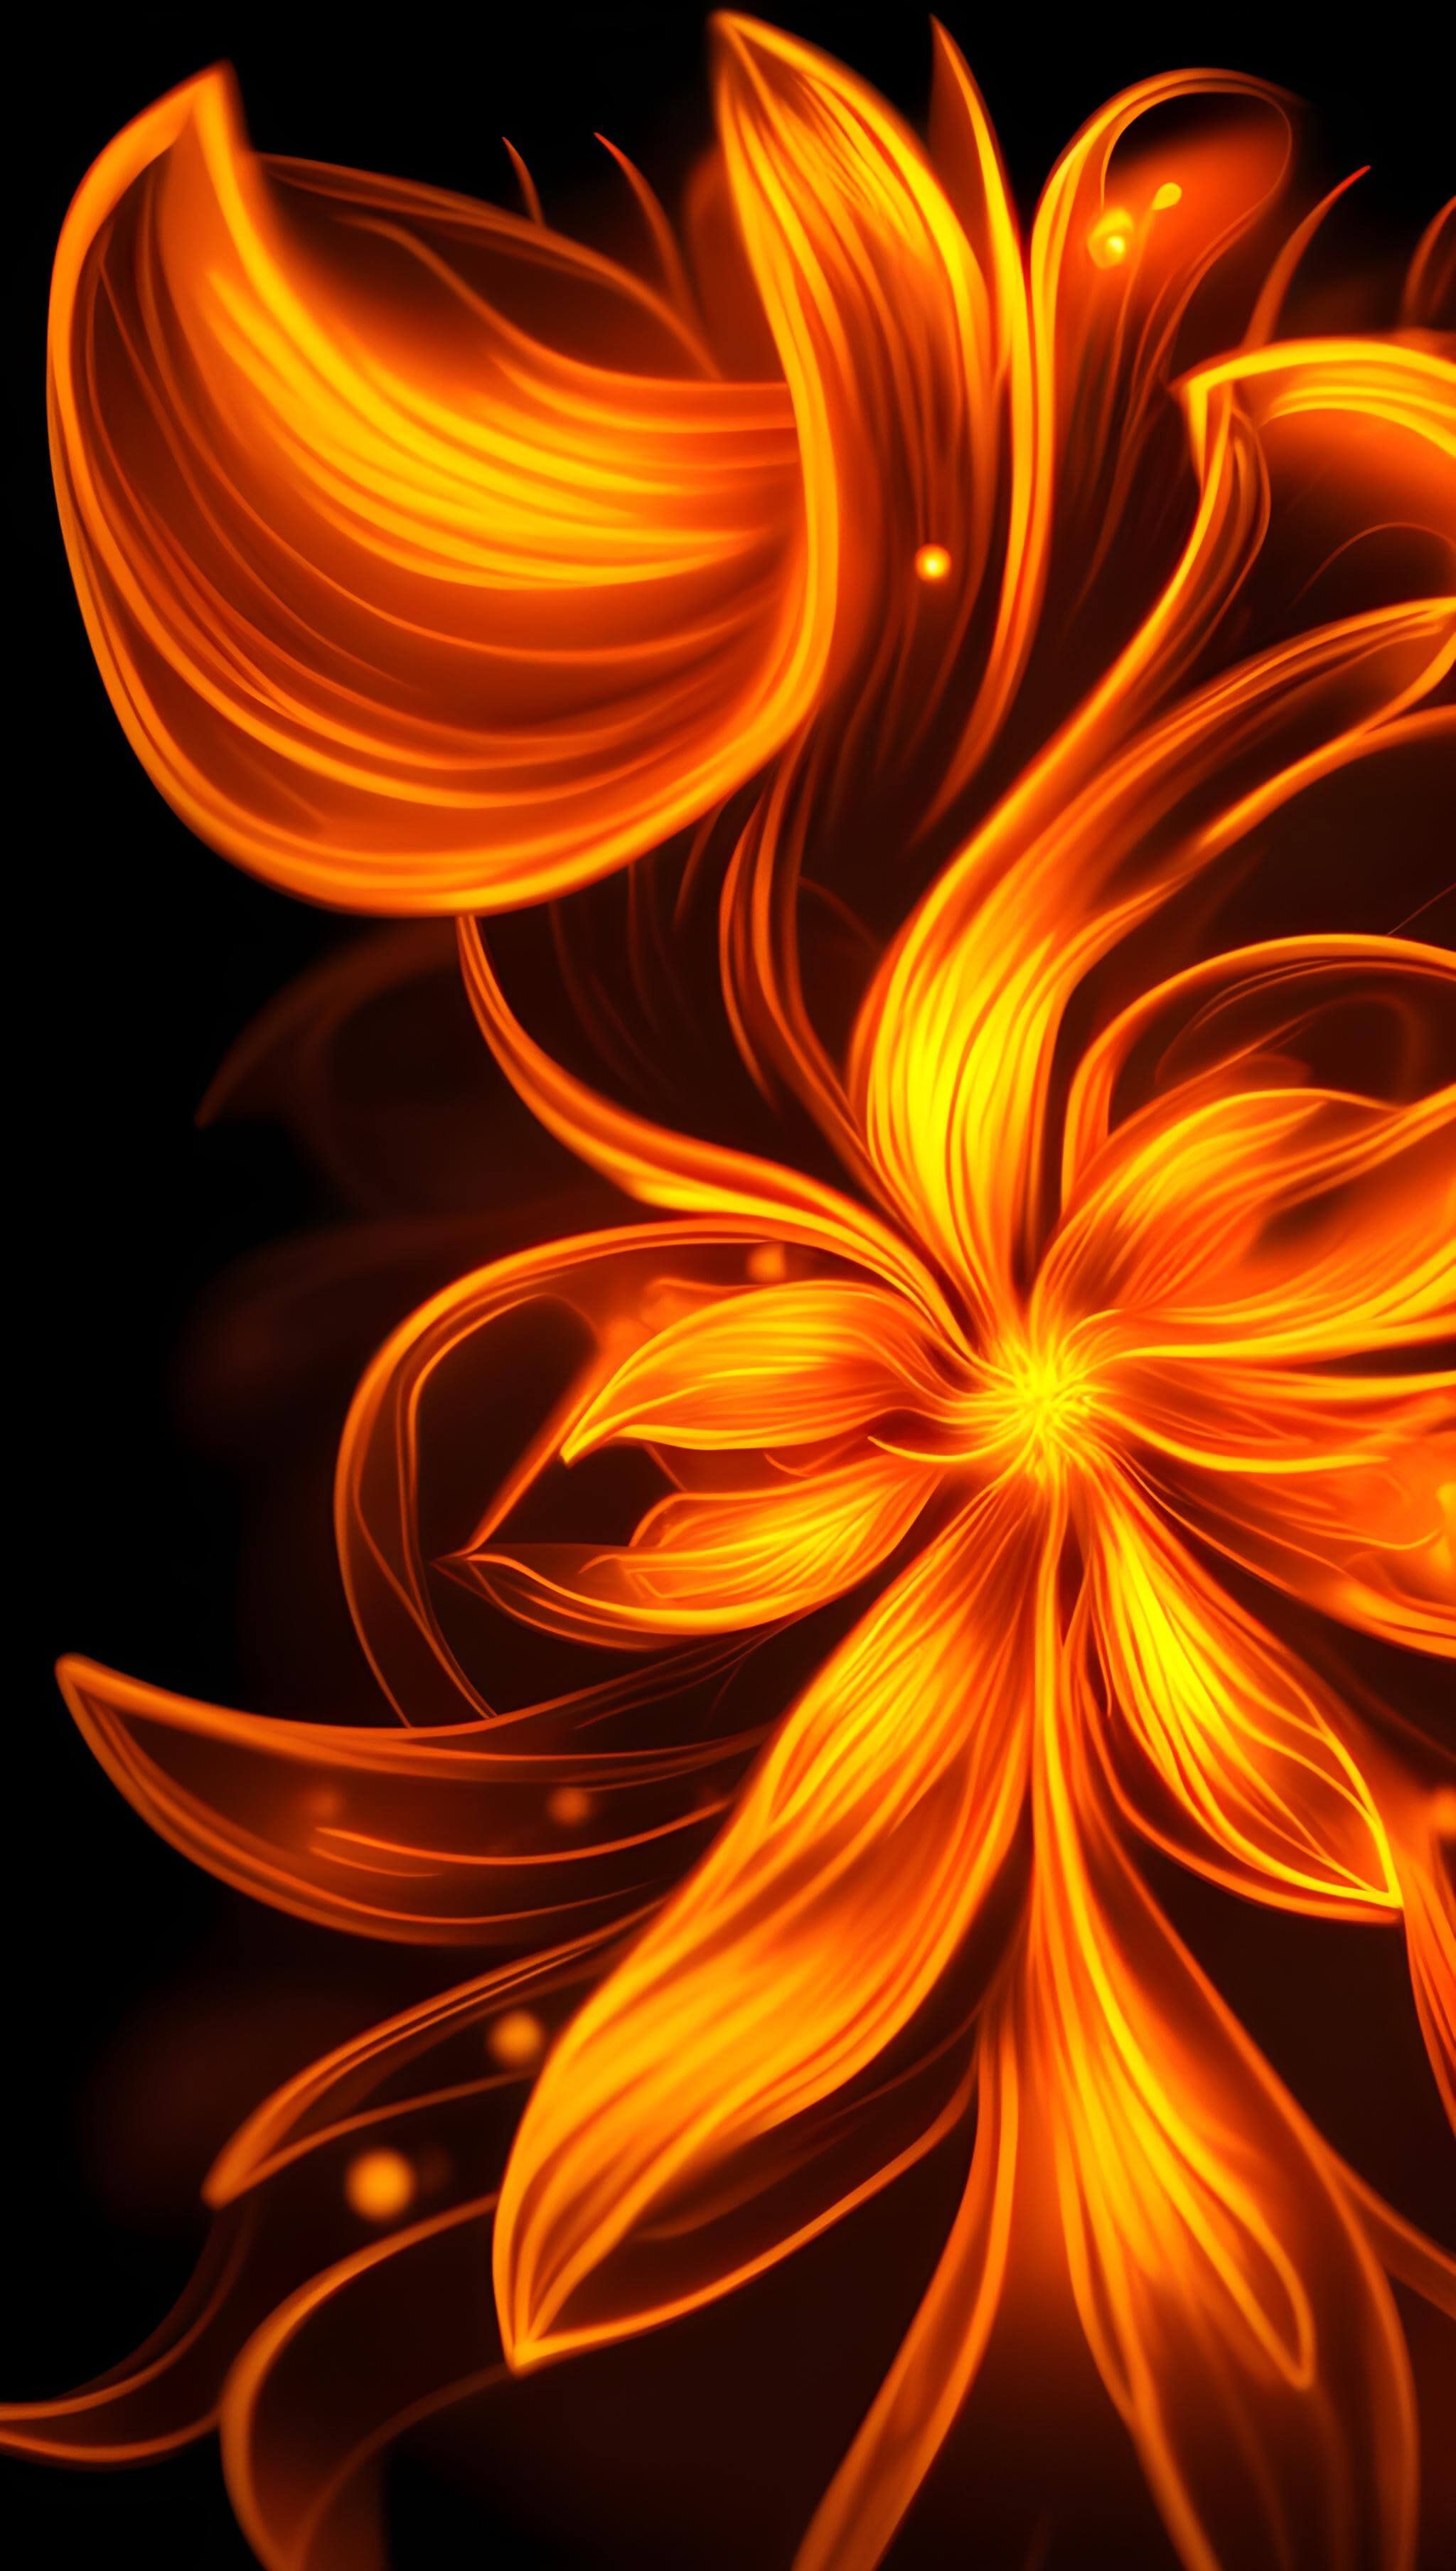 Fire Flower Phone Wallpaper: Add a Pop of Color to Your Screen